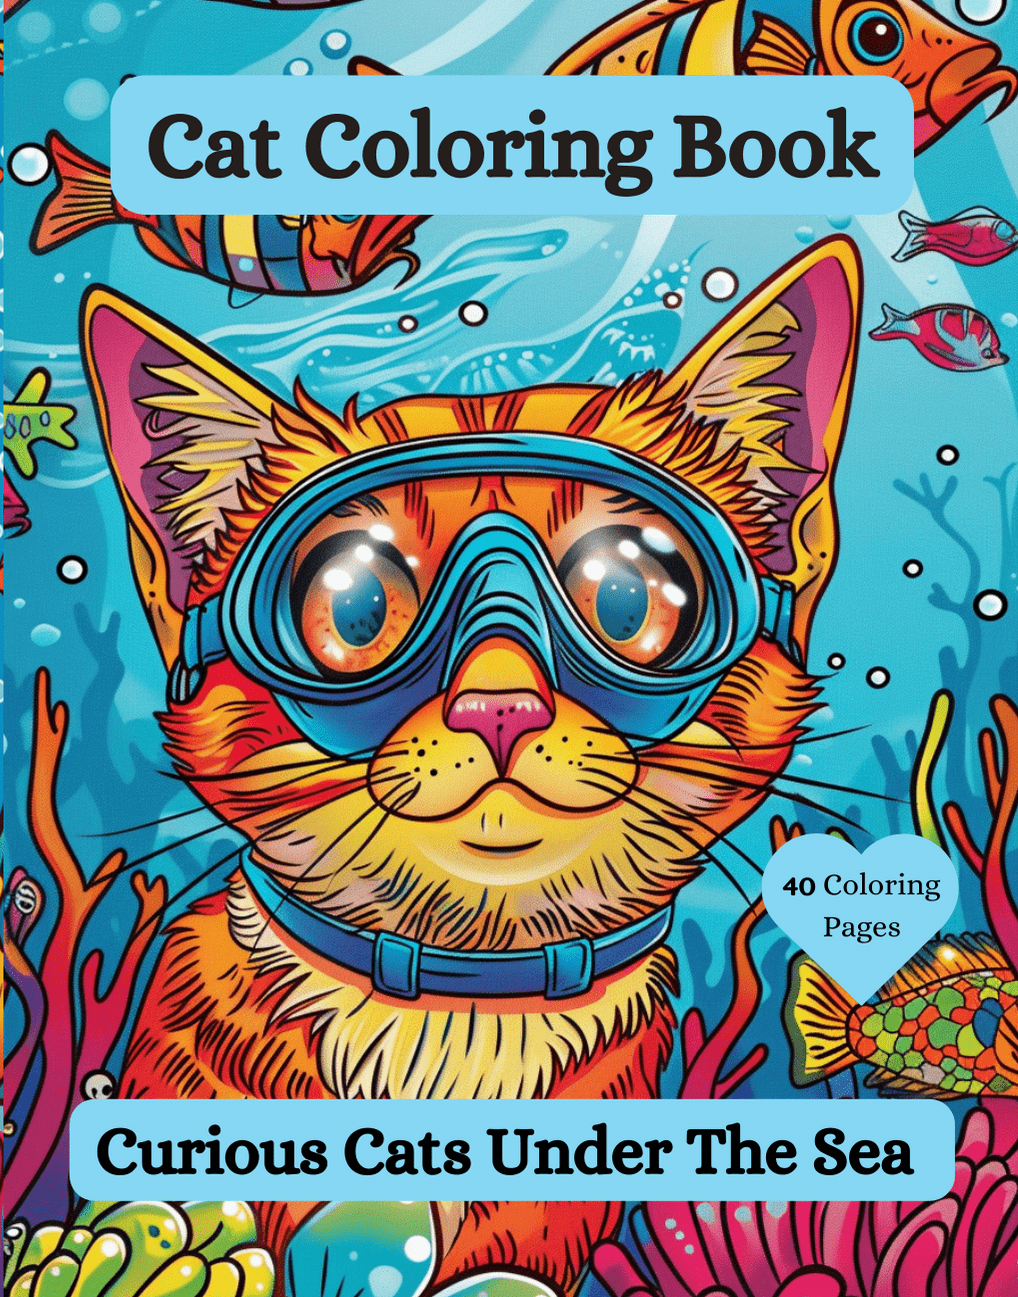 Curious Cats Under The Sea: Cat Coloring Book